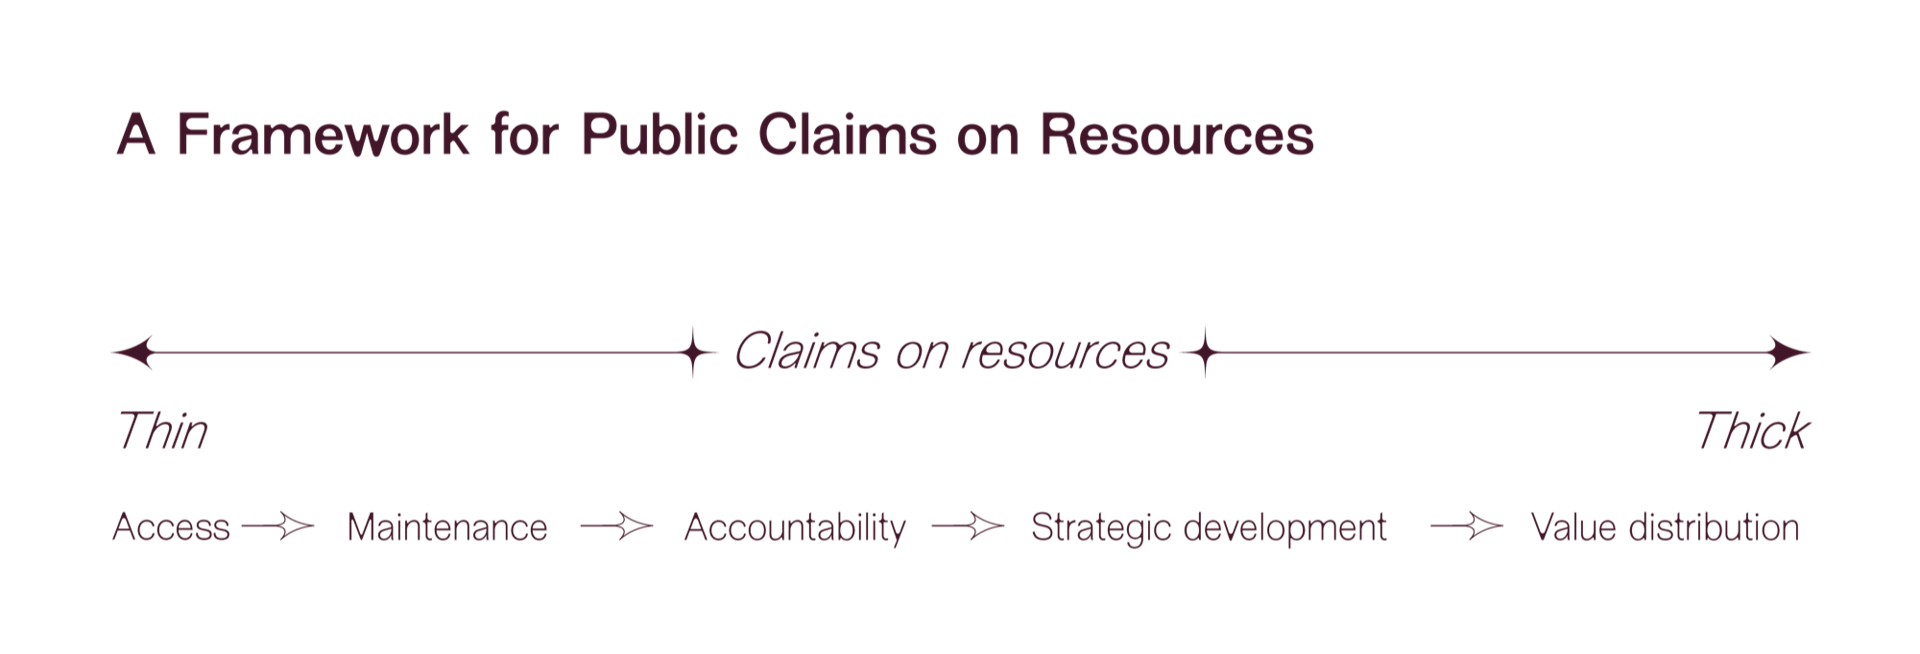 A framework for public claims on resources